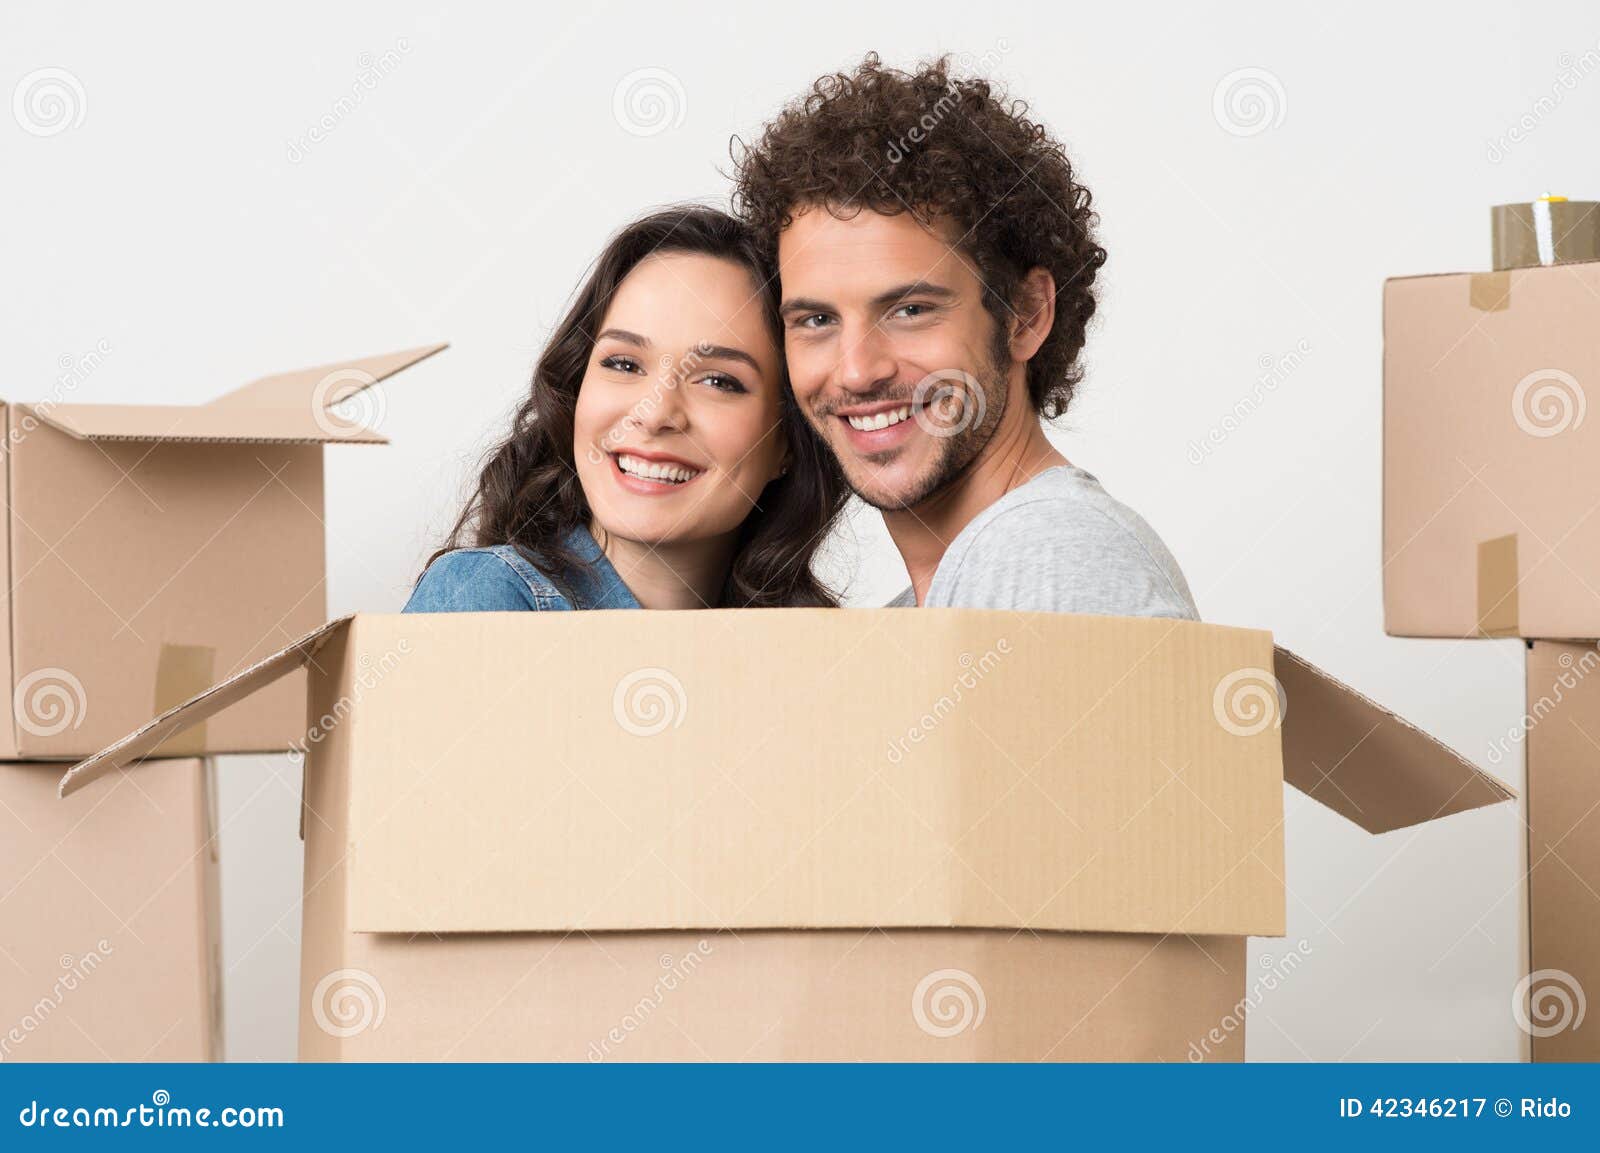 young-couple-inside-cardboard-box-smiling-happy-preparations-move-42346217.jpg